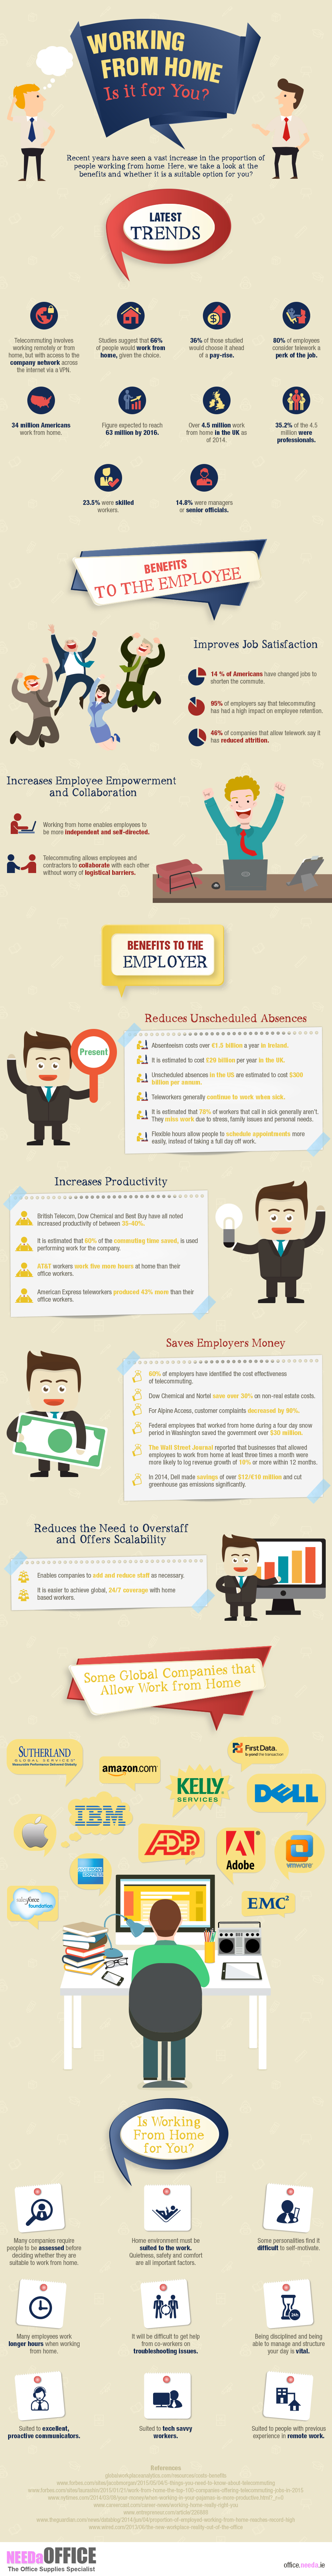 Working-From-Home-Infographic (2)